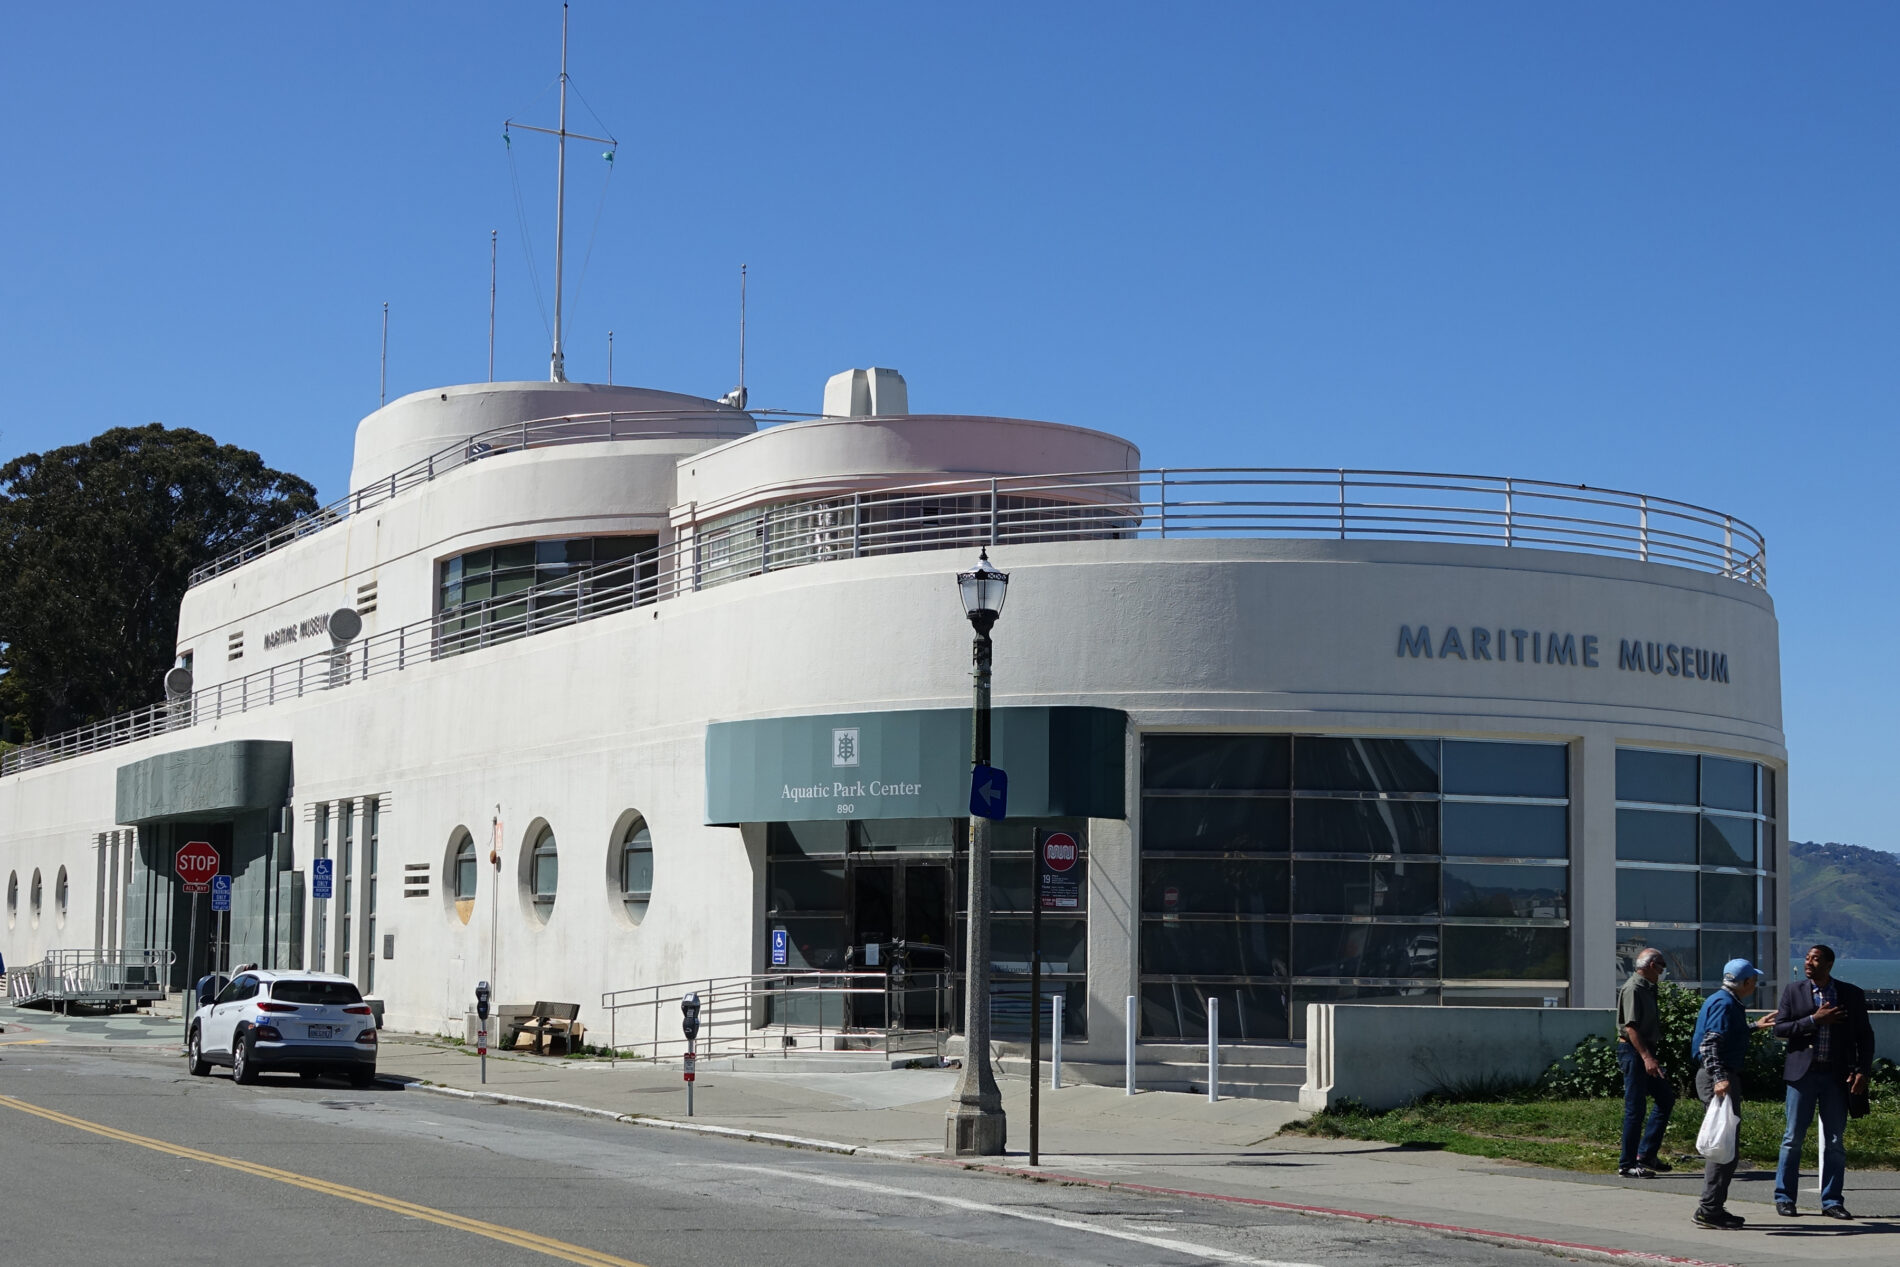 The San Francisco Maritime Museum housed in an art deco building that looks like an ocean liner.